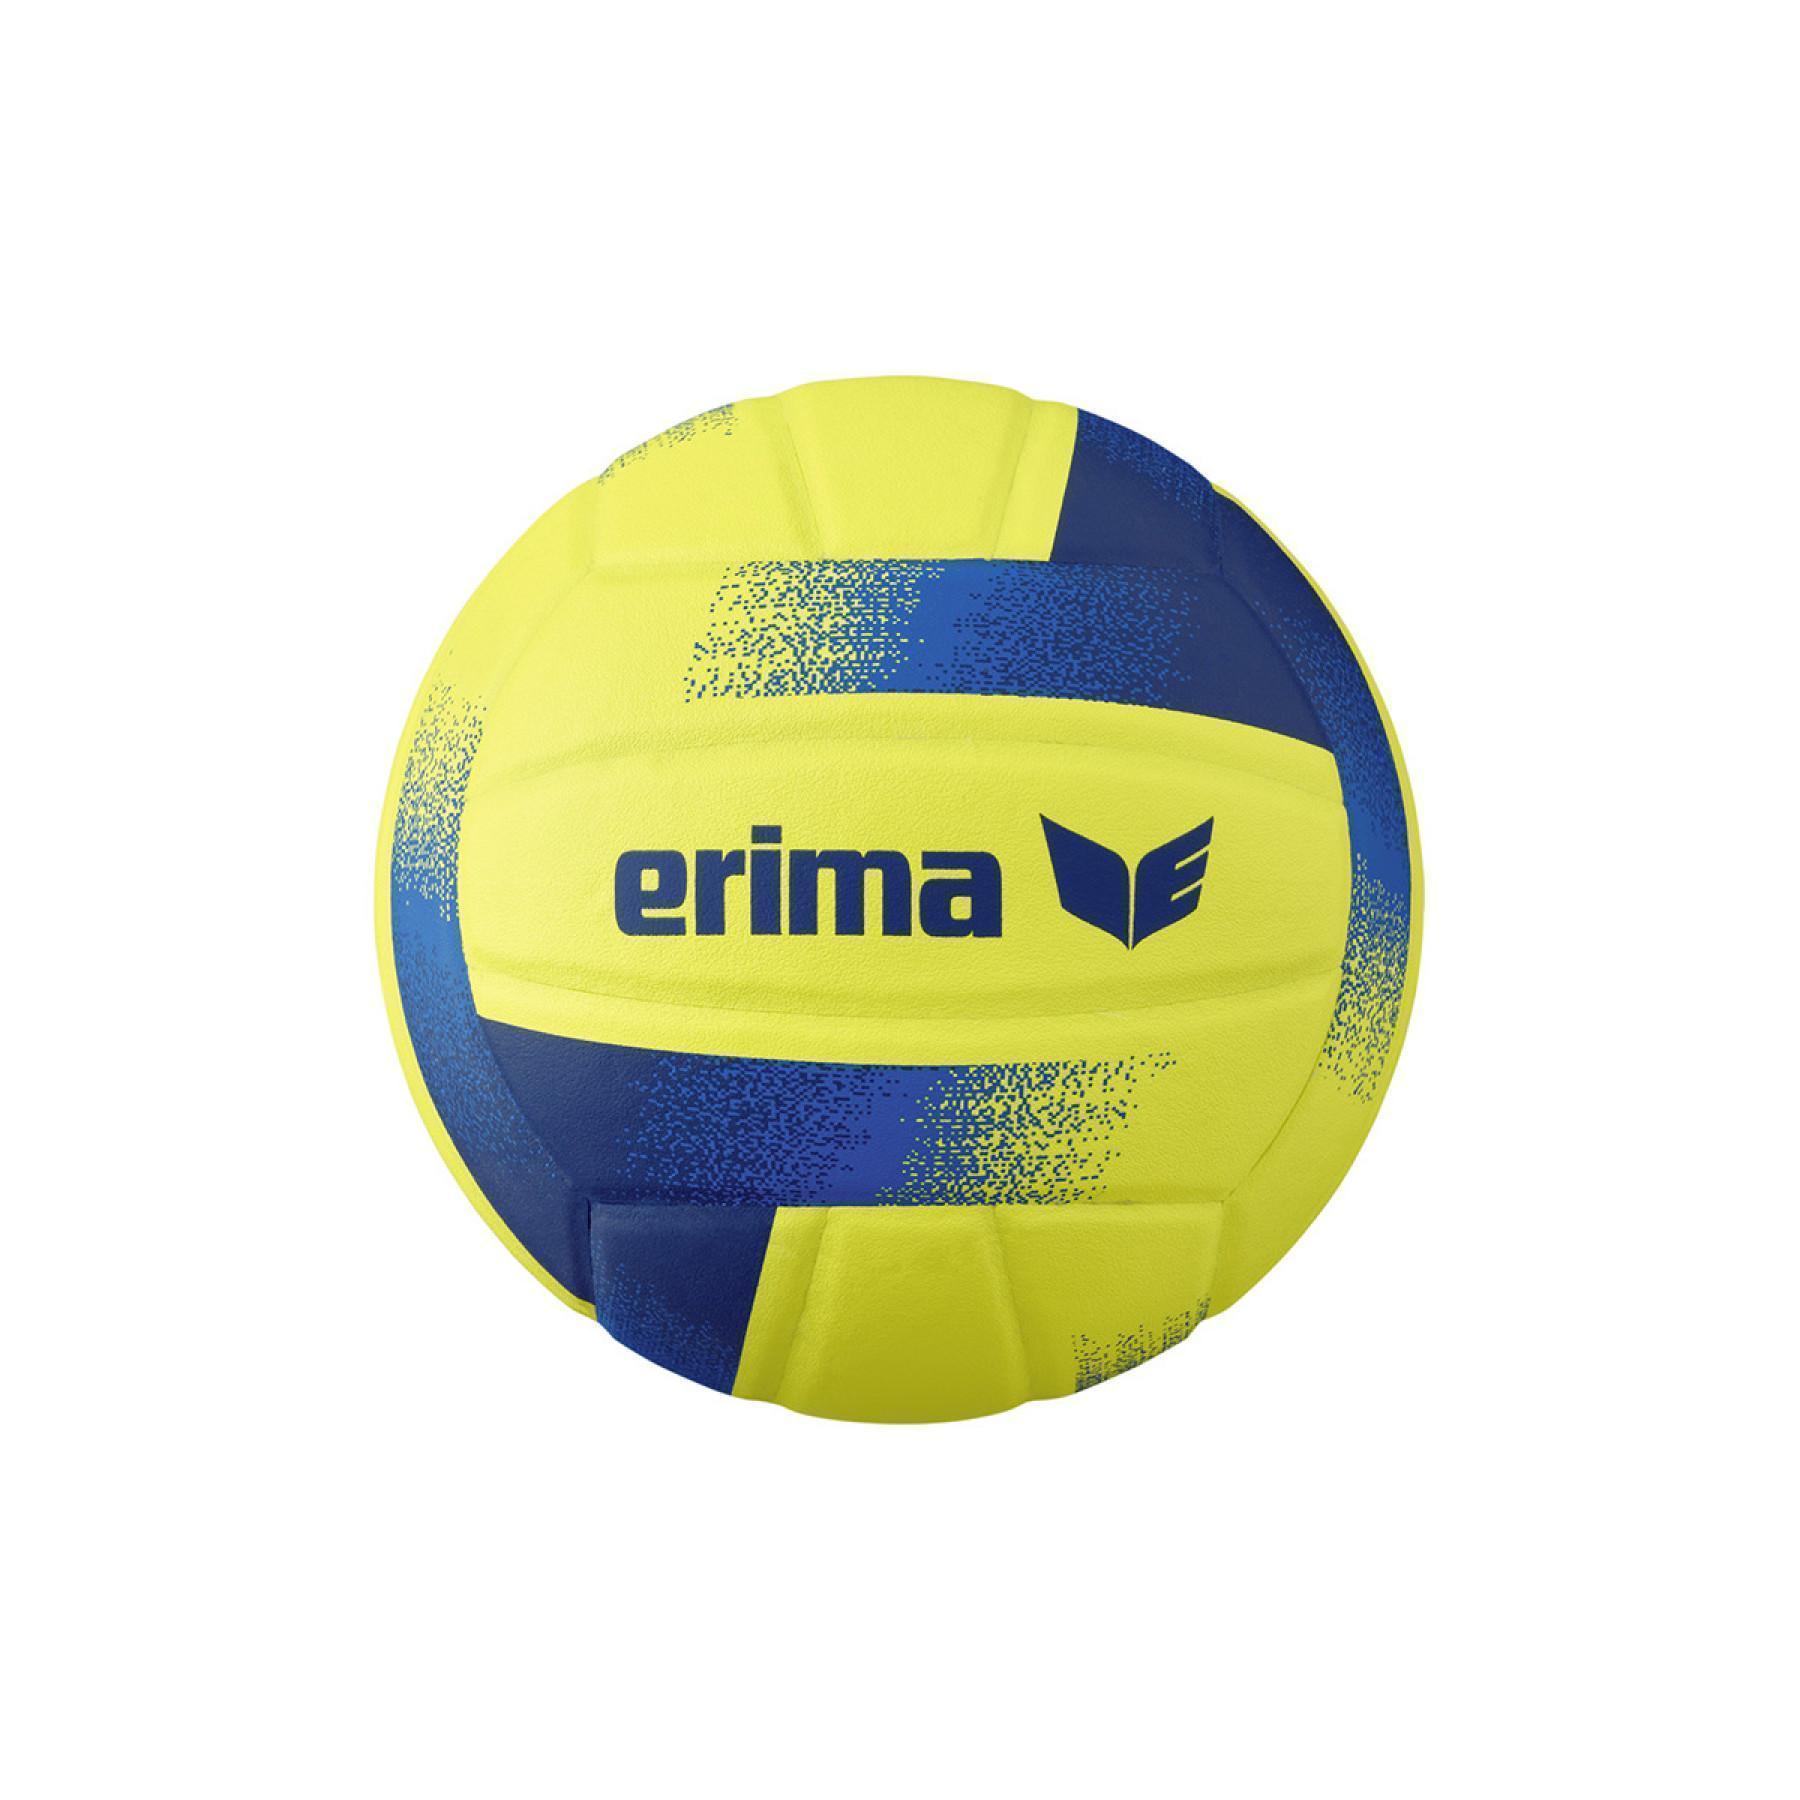 Football Erima King of the court T5